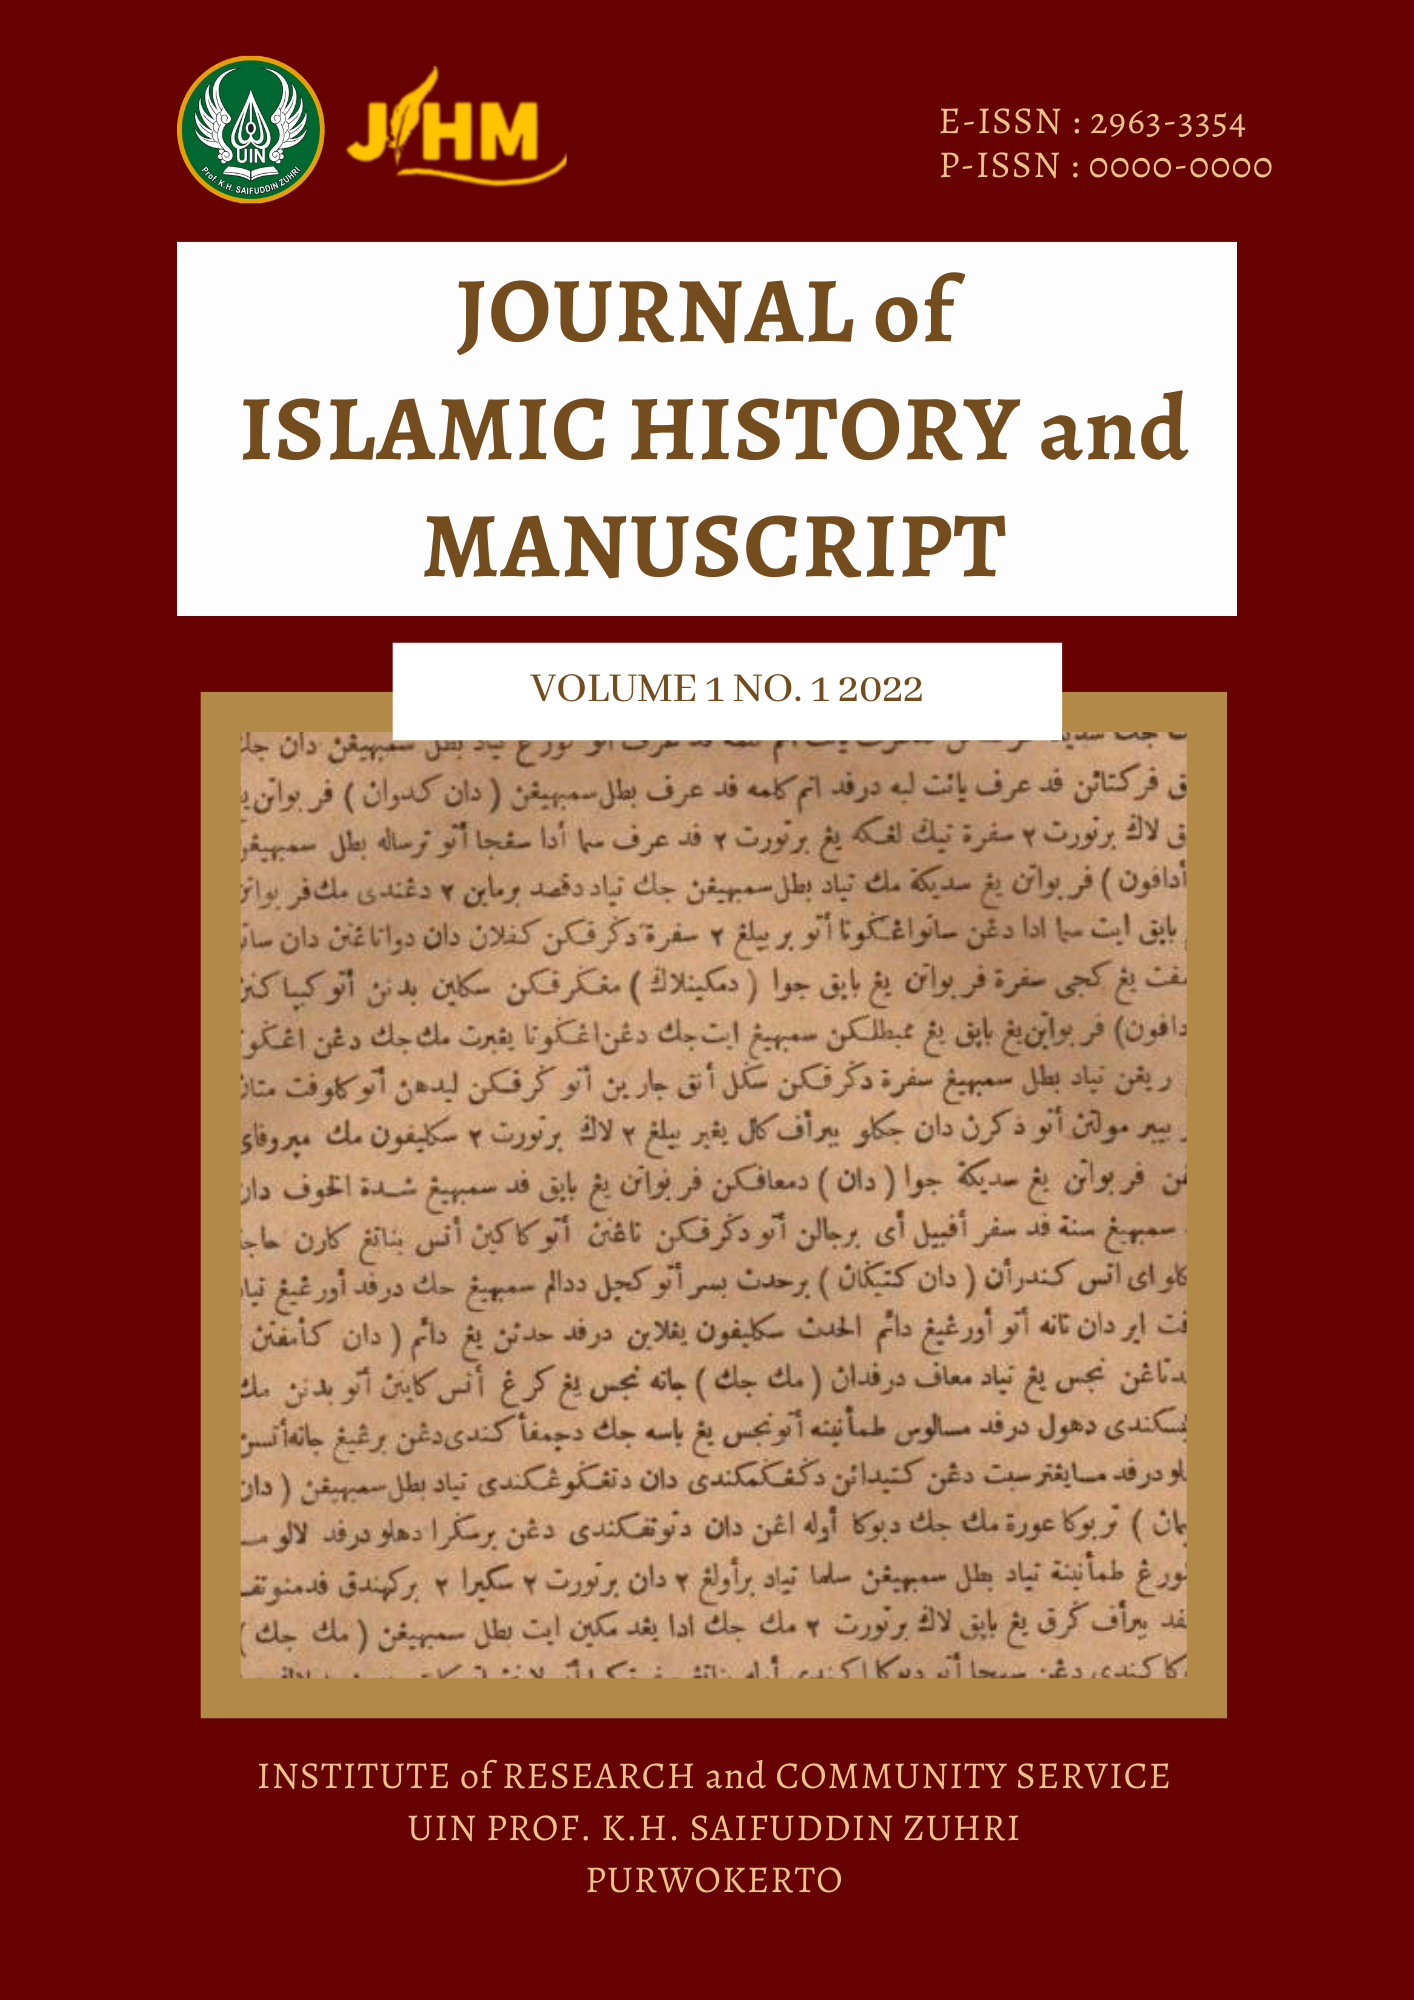 					View Vol. 1 No. 1 (2022): Journal of Islamic History and Manuscript
				